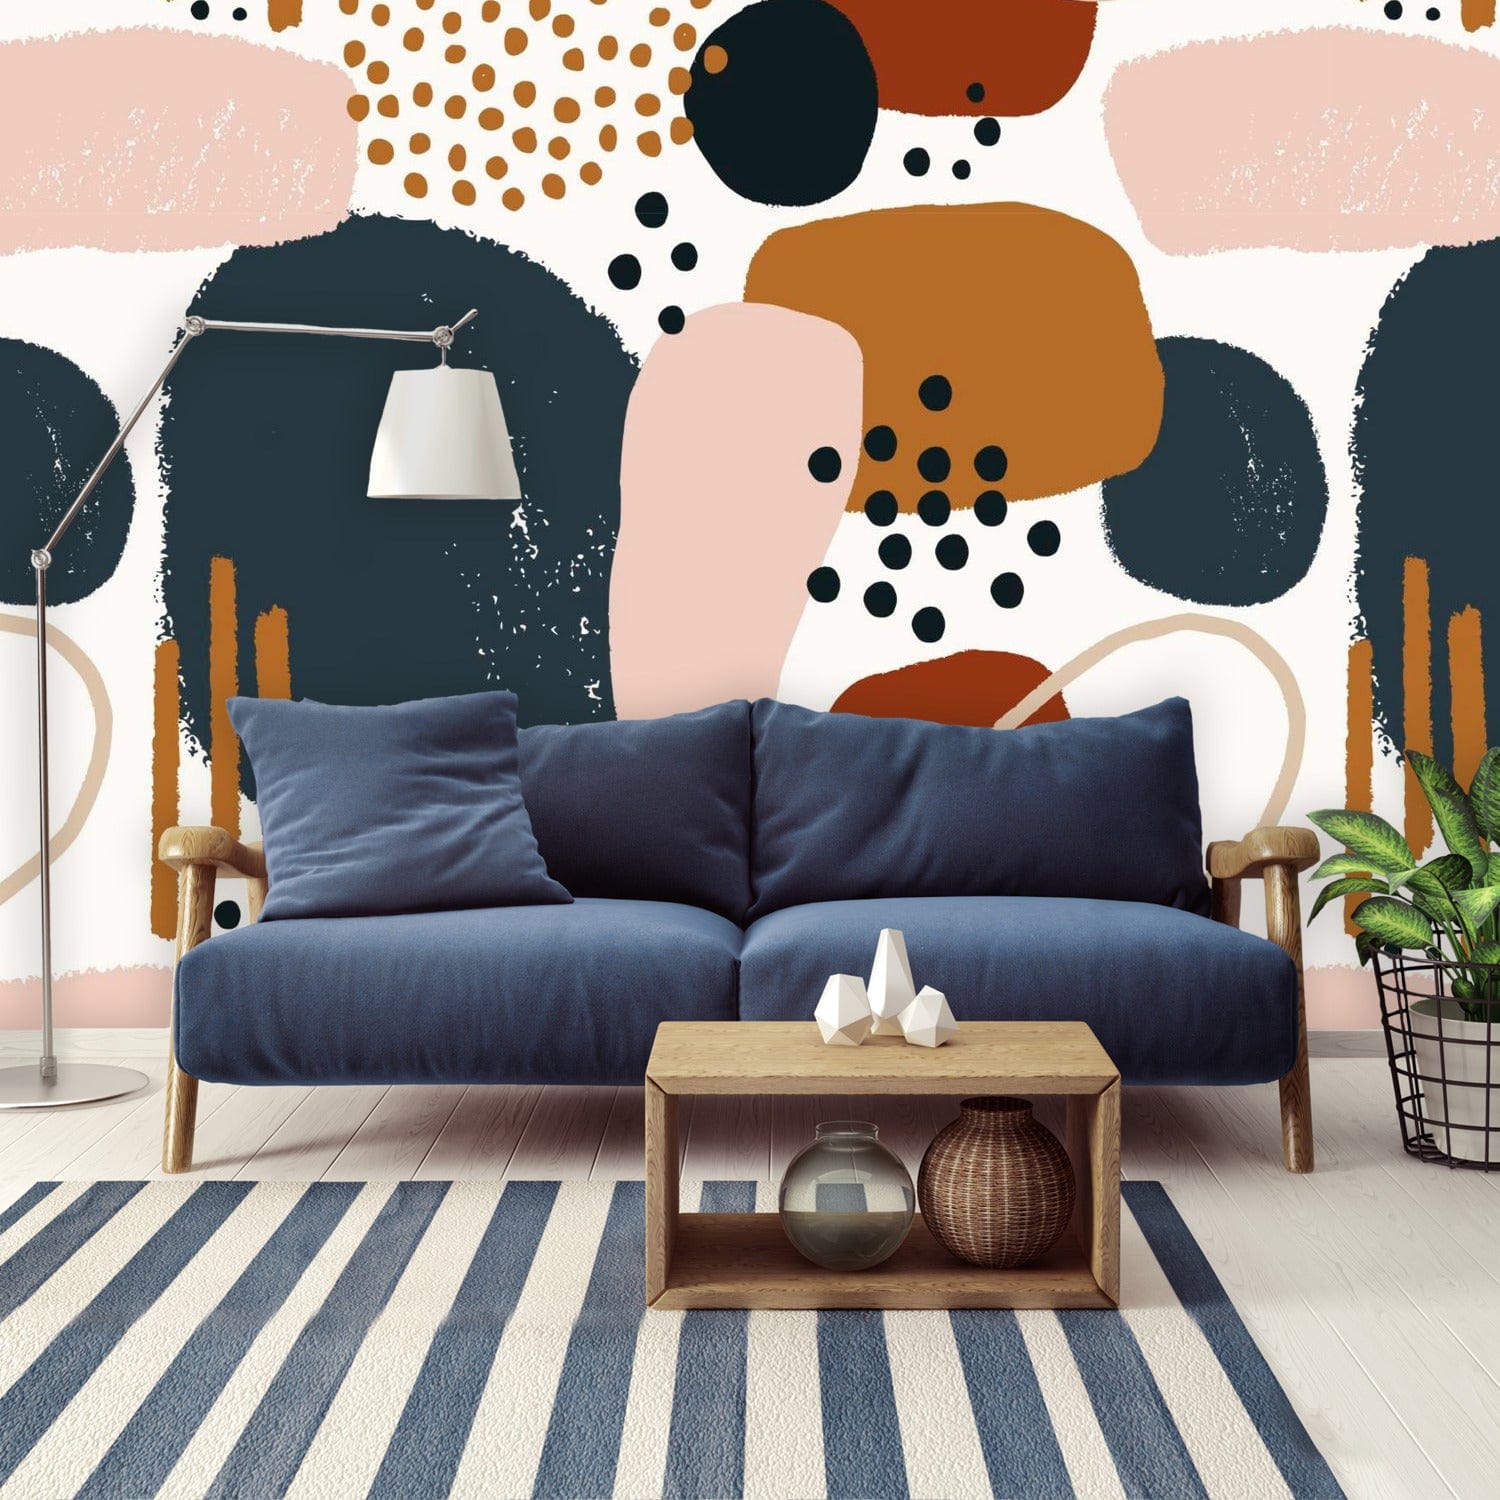 Abstract Watercolor, Boho Brown, Navy Blue, Terracotta, Retro Peel And Stick Mid Mod Wall Murals Wallpaper H96 x W140